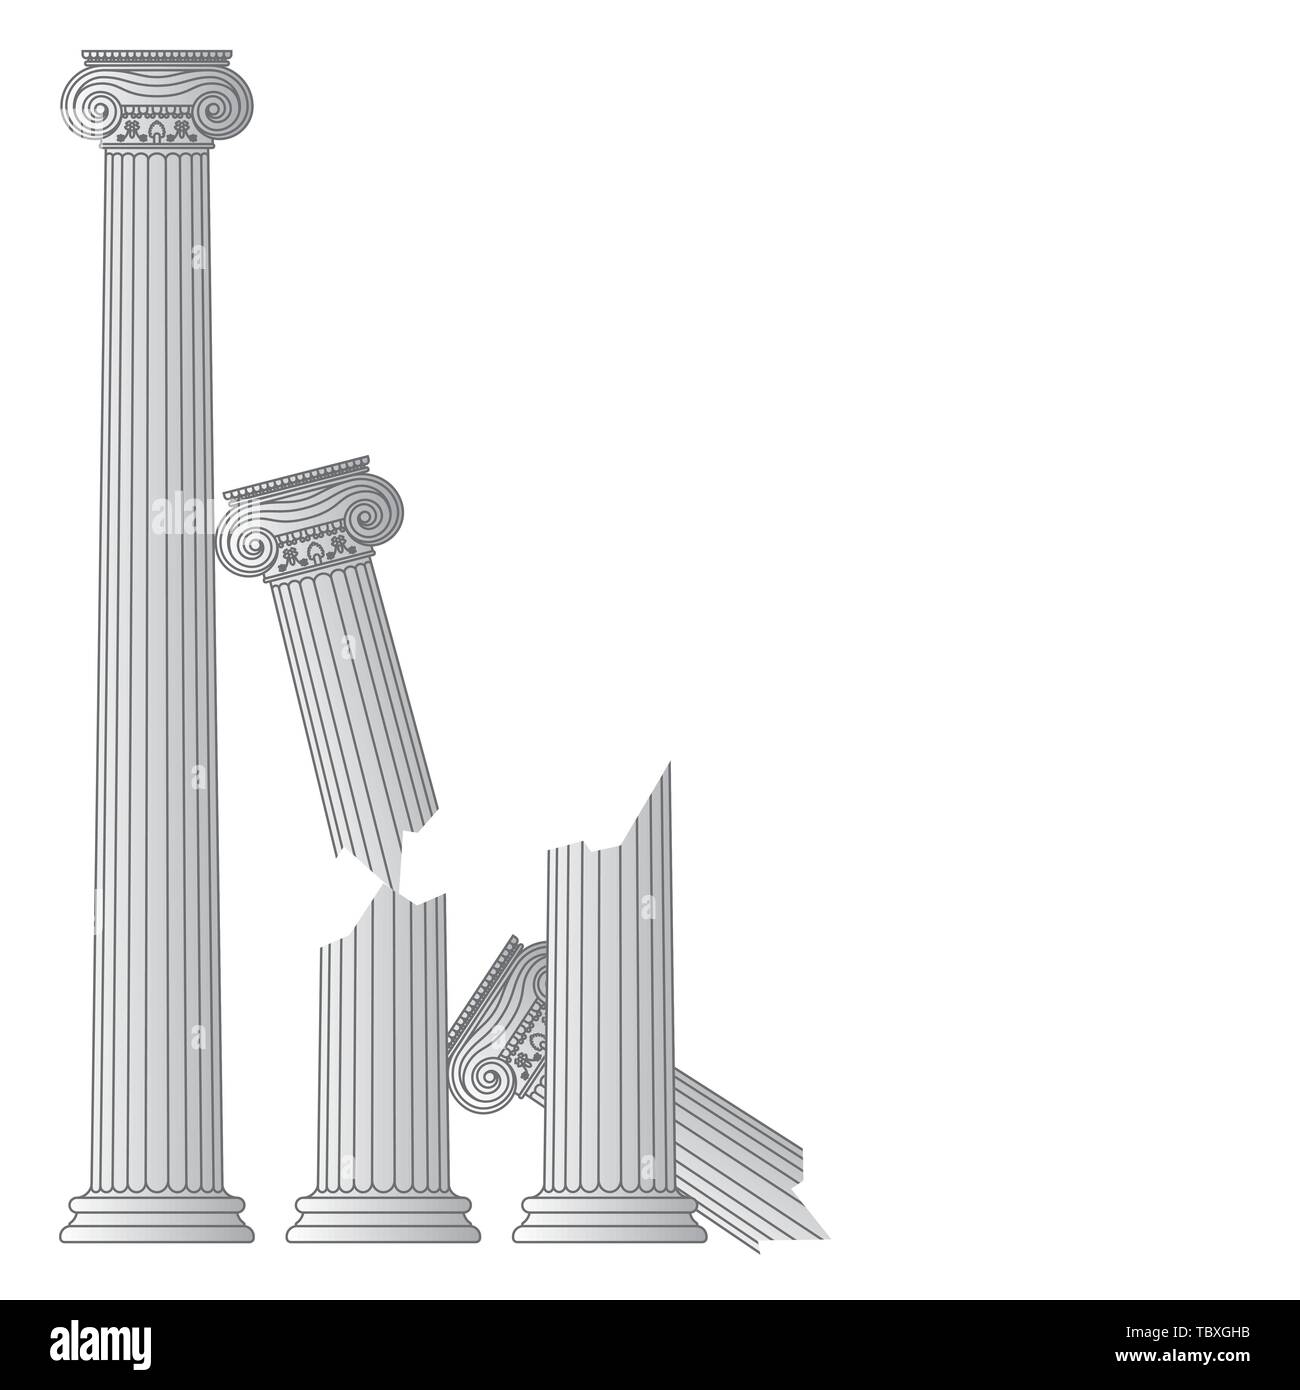 destroyed ancient Greek antique columns with capitals of the Ionic order and with place for text vector illustration Stock Vector